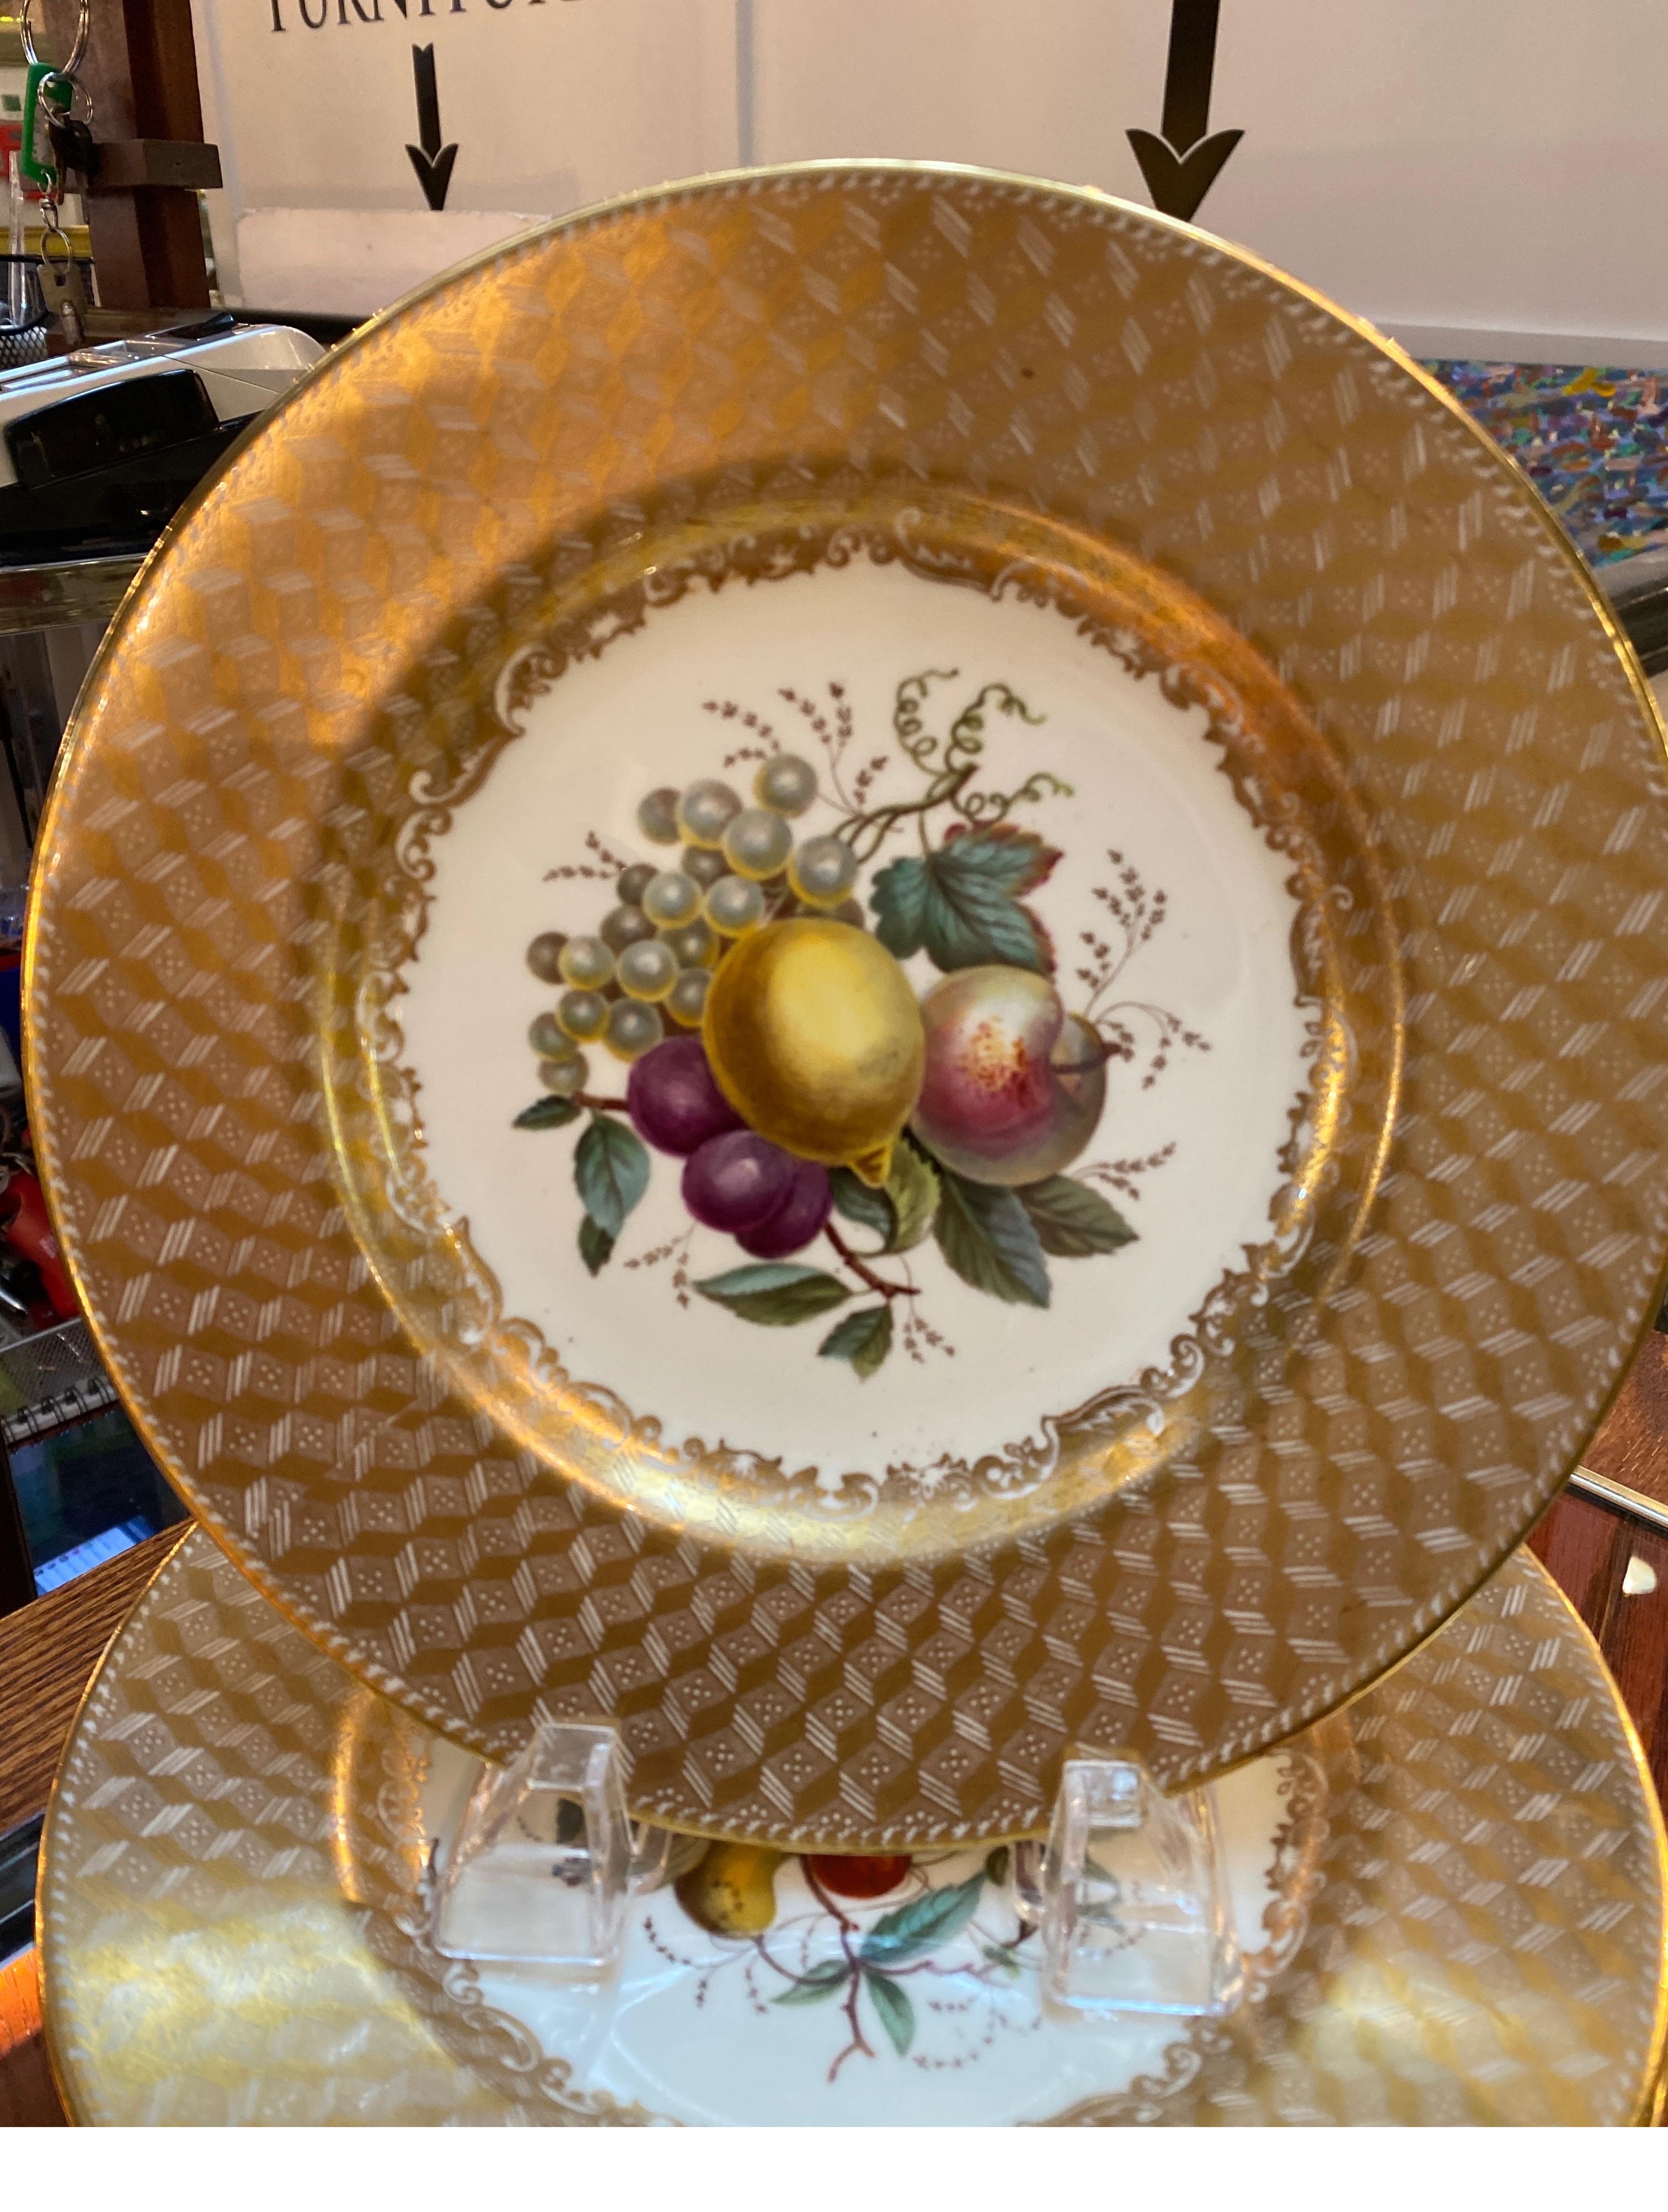 An opulent set of 10 hand painted 9 inch diameter plates, England Circa 1900-1910. These plates with hand painted centers of fruit design with broad gold encrusted borders, Marked Copland Spode year mark from 1890's till the early 20th century.